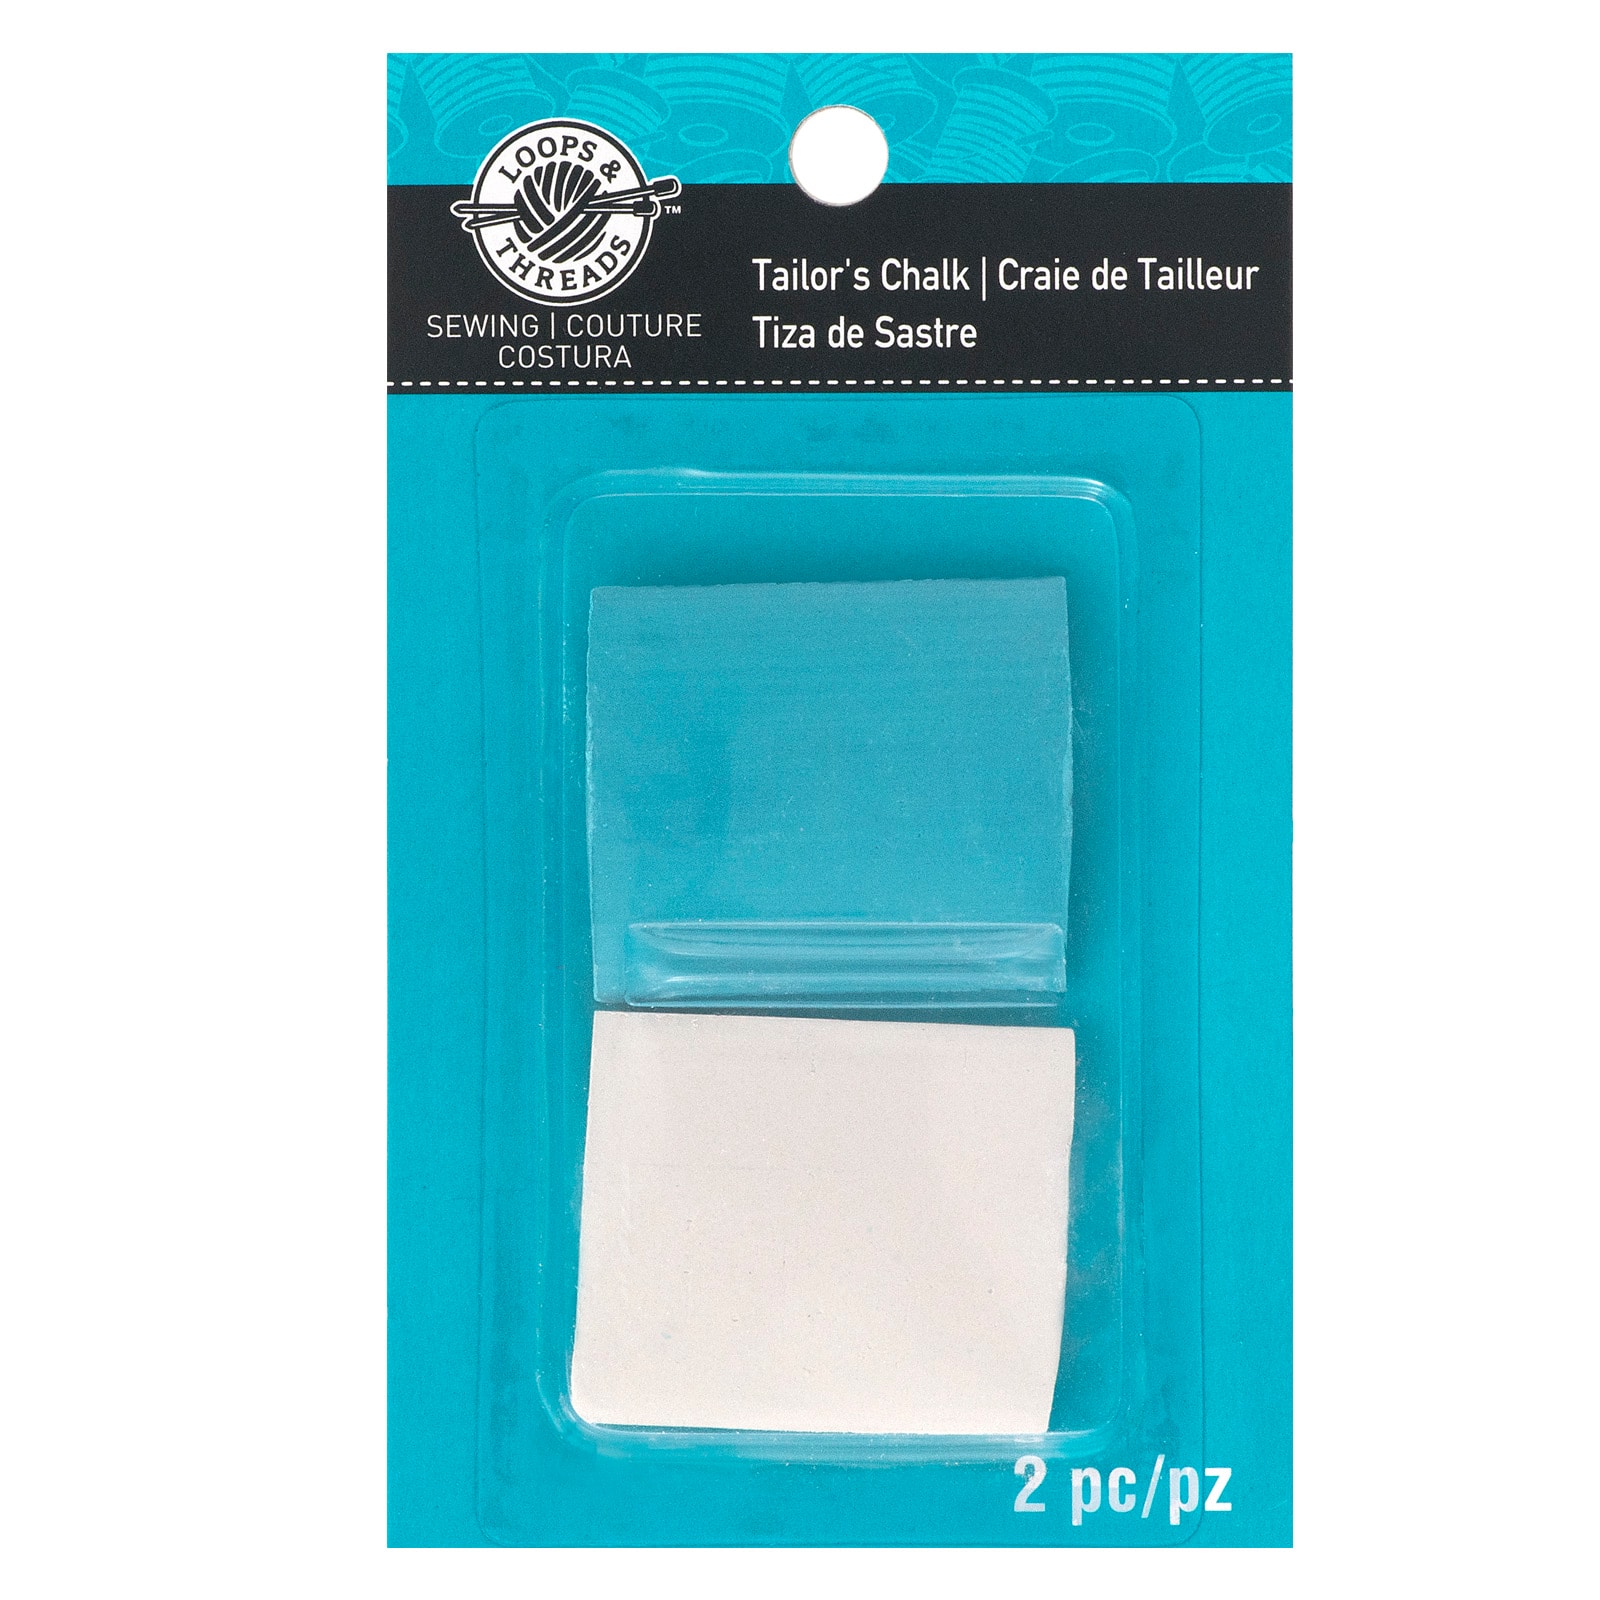 Kare & Kind 30X Tailor's Chalk - Sewing Notions and Accessories - Triangular Fabric Markers for Crafting, Sewing, Quilting - Comes with A Plastic